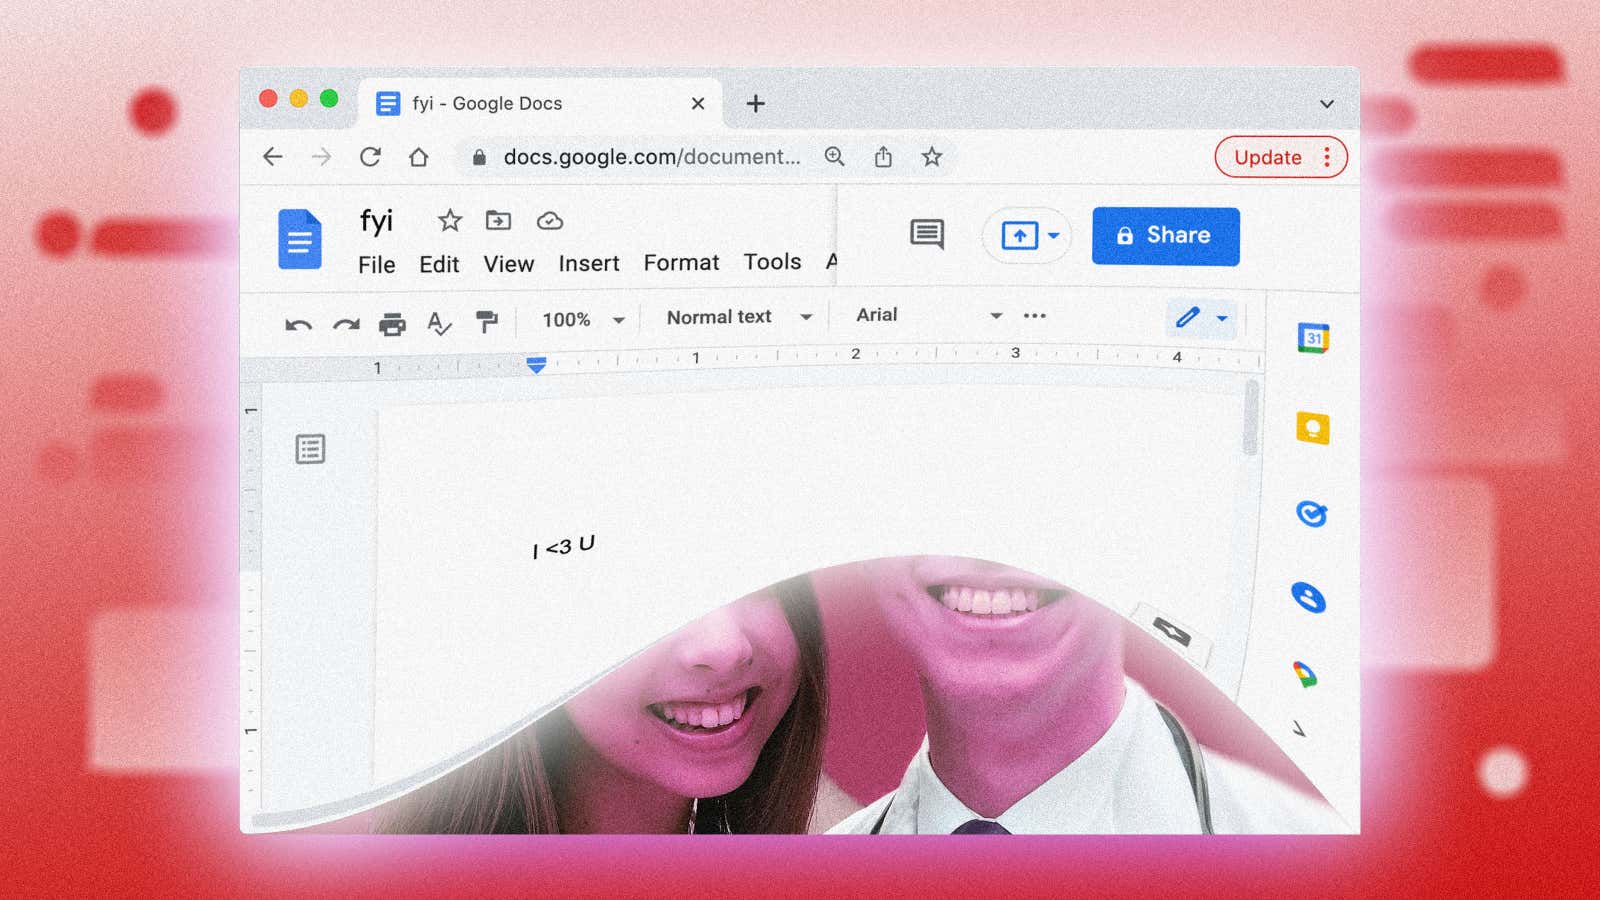 Kevin and Sophia fell in love on a Google Doc.